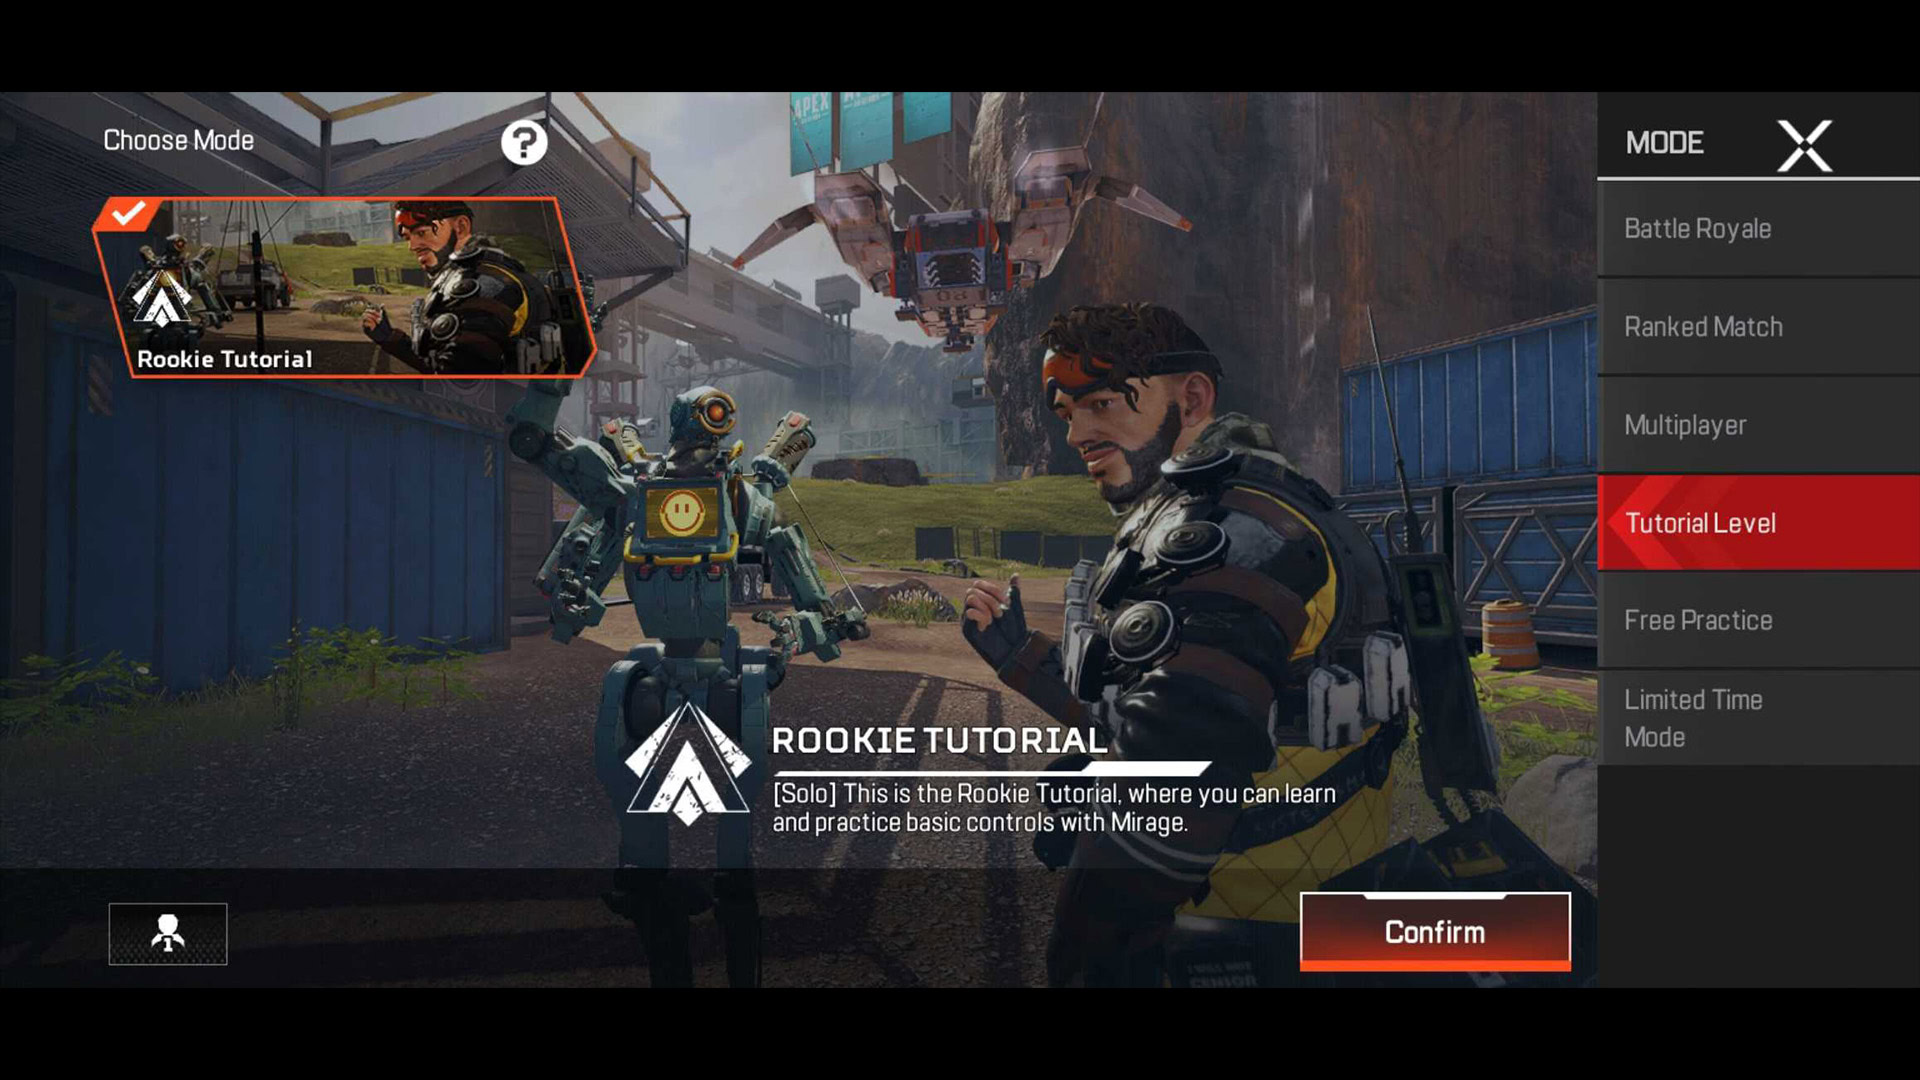 New* Apex Legends Mobile Game CONFIRMED! (It's Back?) 